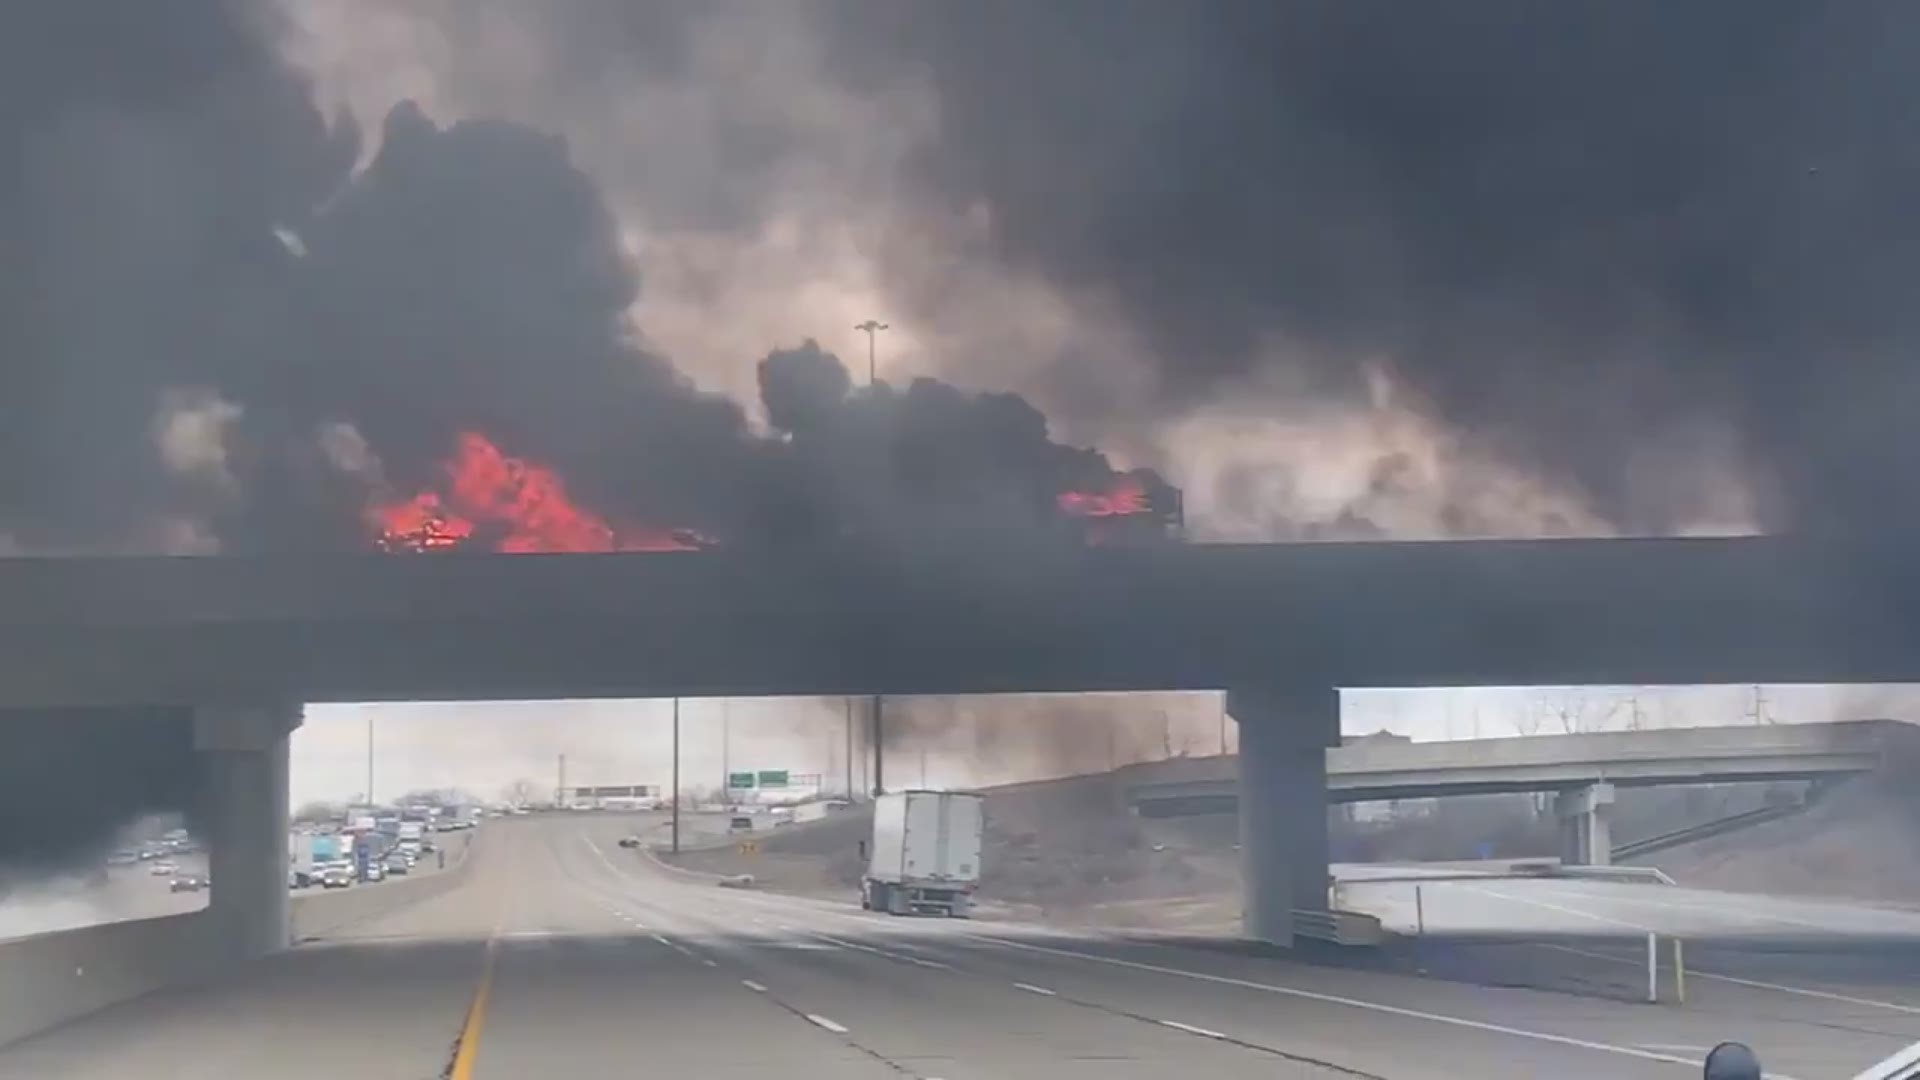 A tanker filled with jet fuel exploded on I-465 heading to I-70 in Indianapolis. Police say some good Samaritans pulled the driver out. His condition is critical.